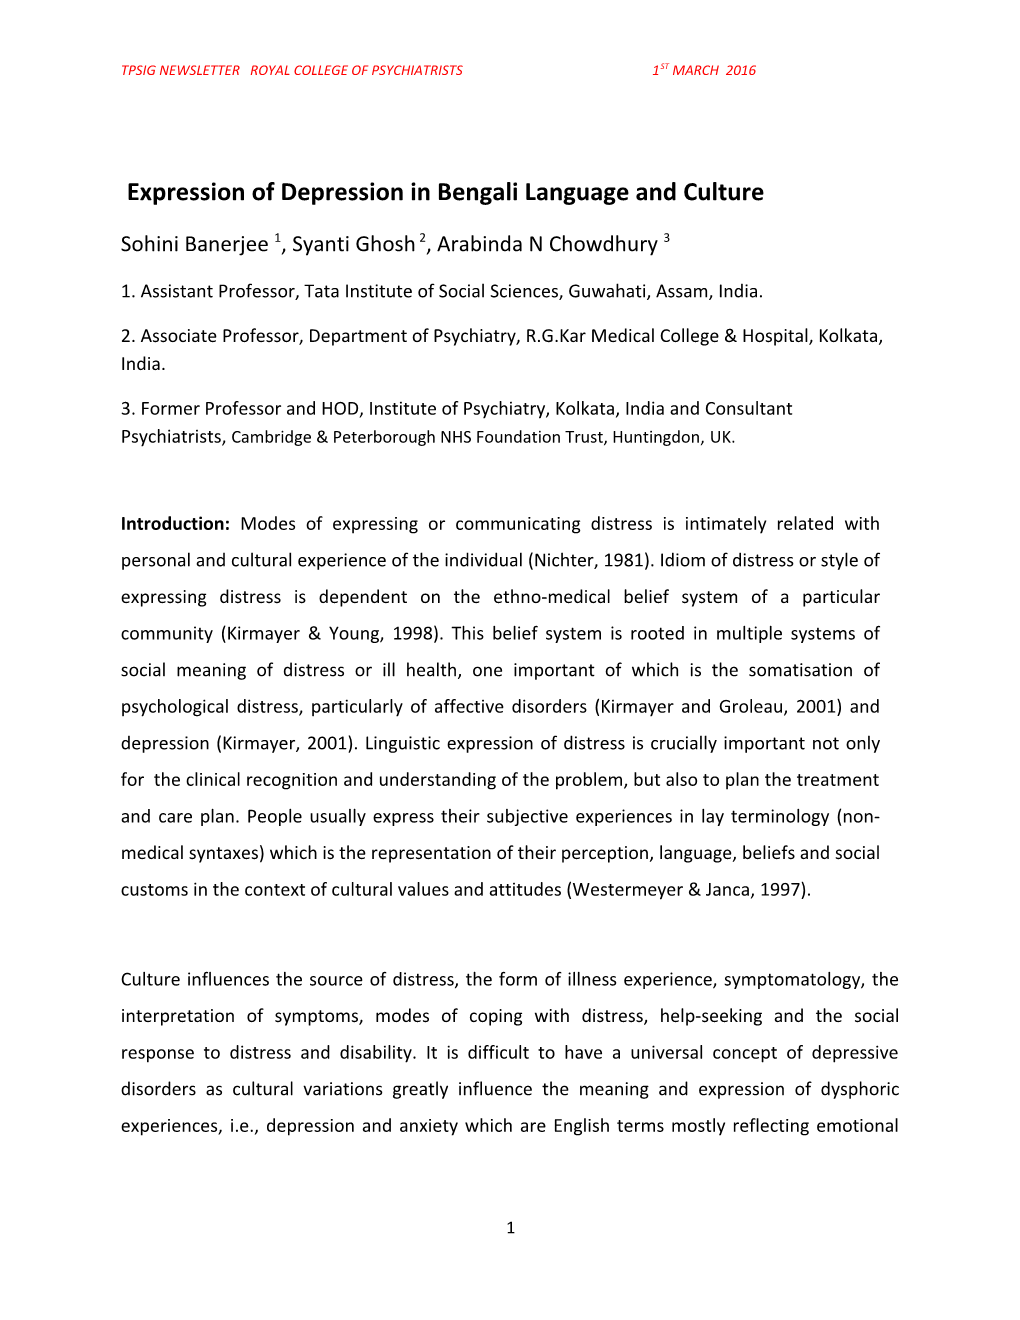 Expression of Depression in Bengali Language and Culture